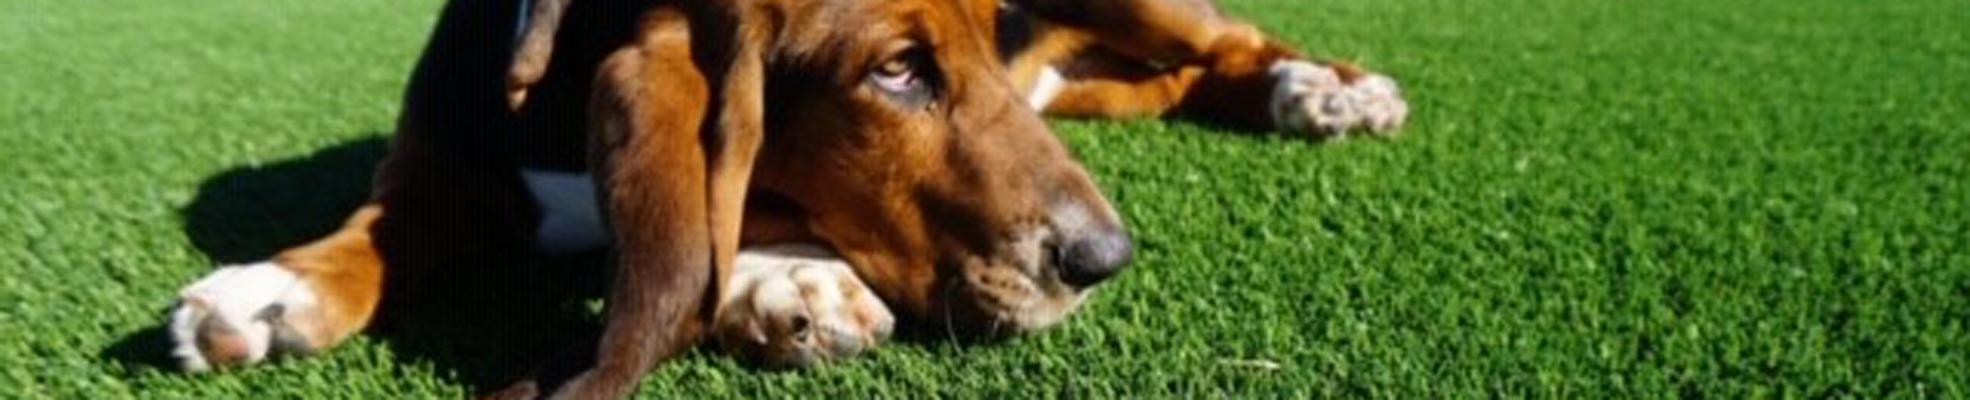 Dog relaxing on artificial grass installed by SYNLawn